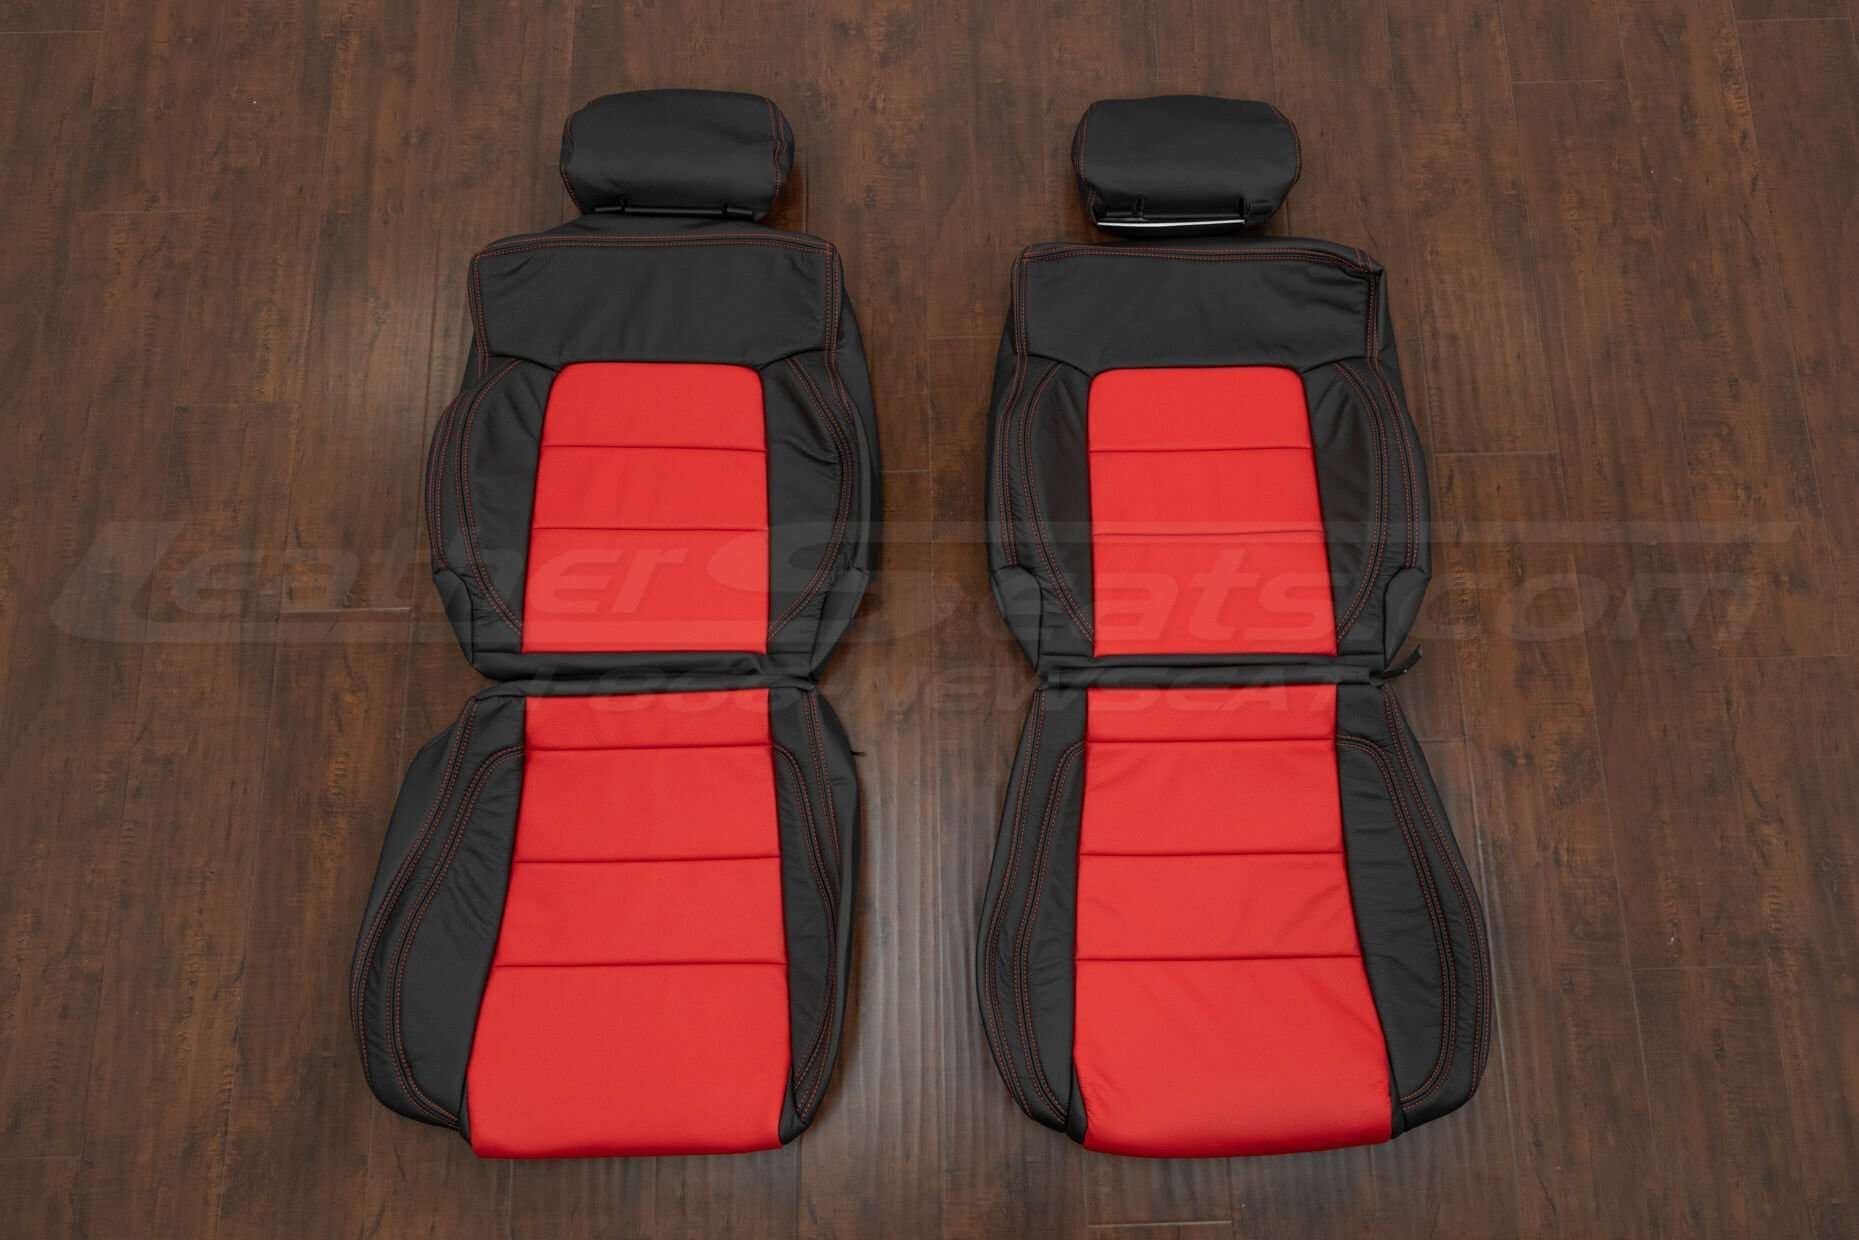 1995-1999 Mitsubishi Eclipse Leather Seat Upholstery Kit - Black/Bright Red - Front seat upholstery